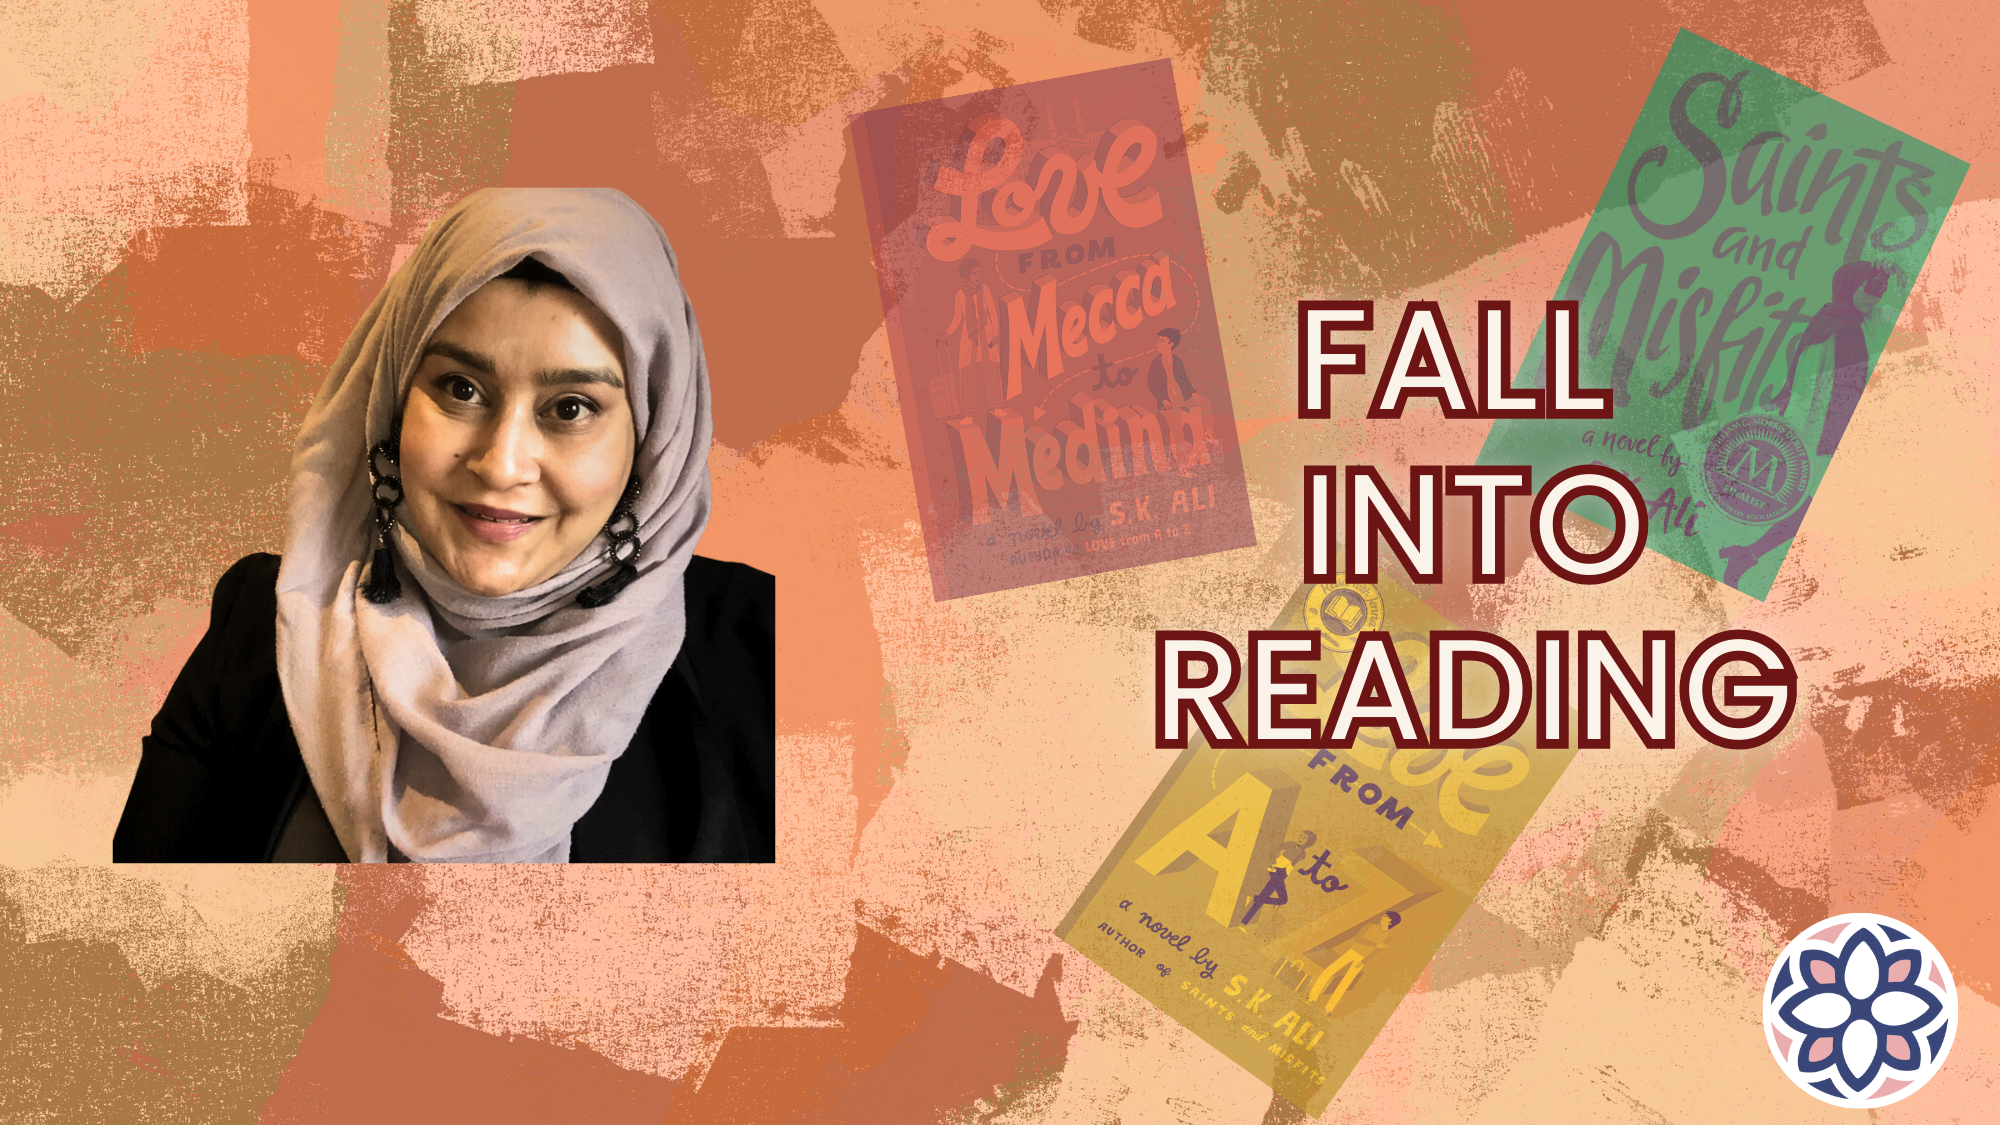 S. K. Ali on Halal Romance and Creating a Muslim Literary Canon